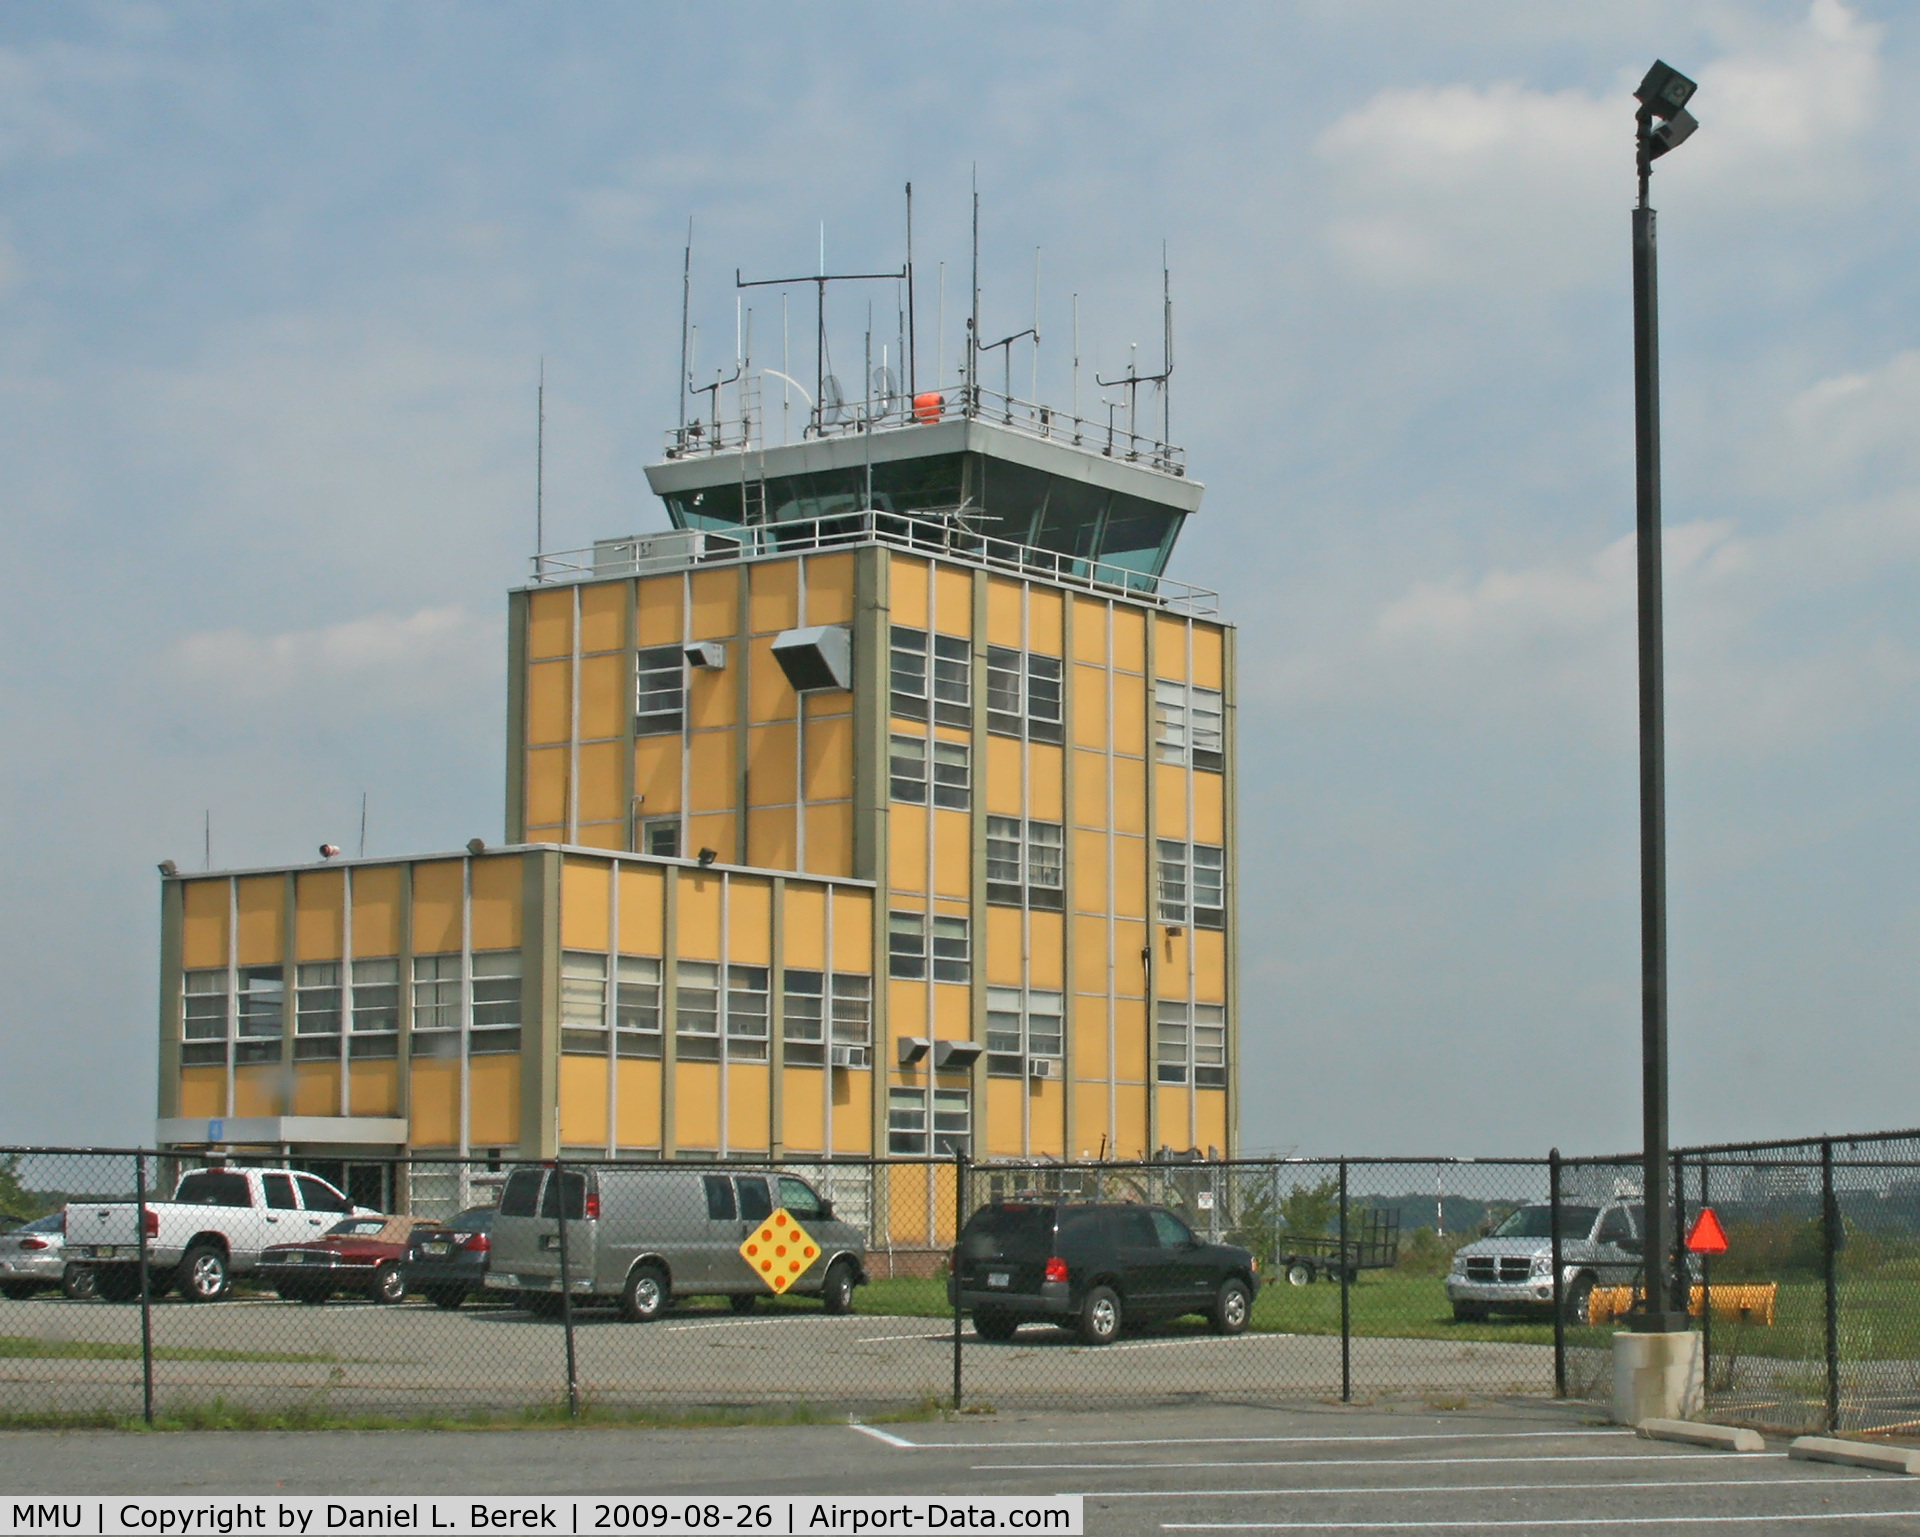 Morristown Municipal Airport (MMU) - The control tower is original; the rest of this once quiet airport is surrounded by a panopoly of operators of private jets.